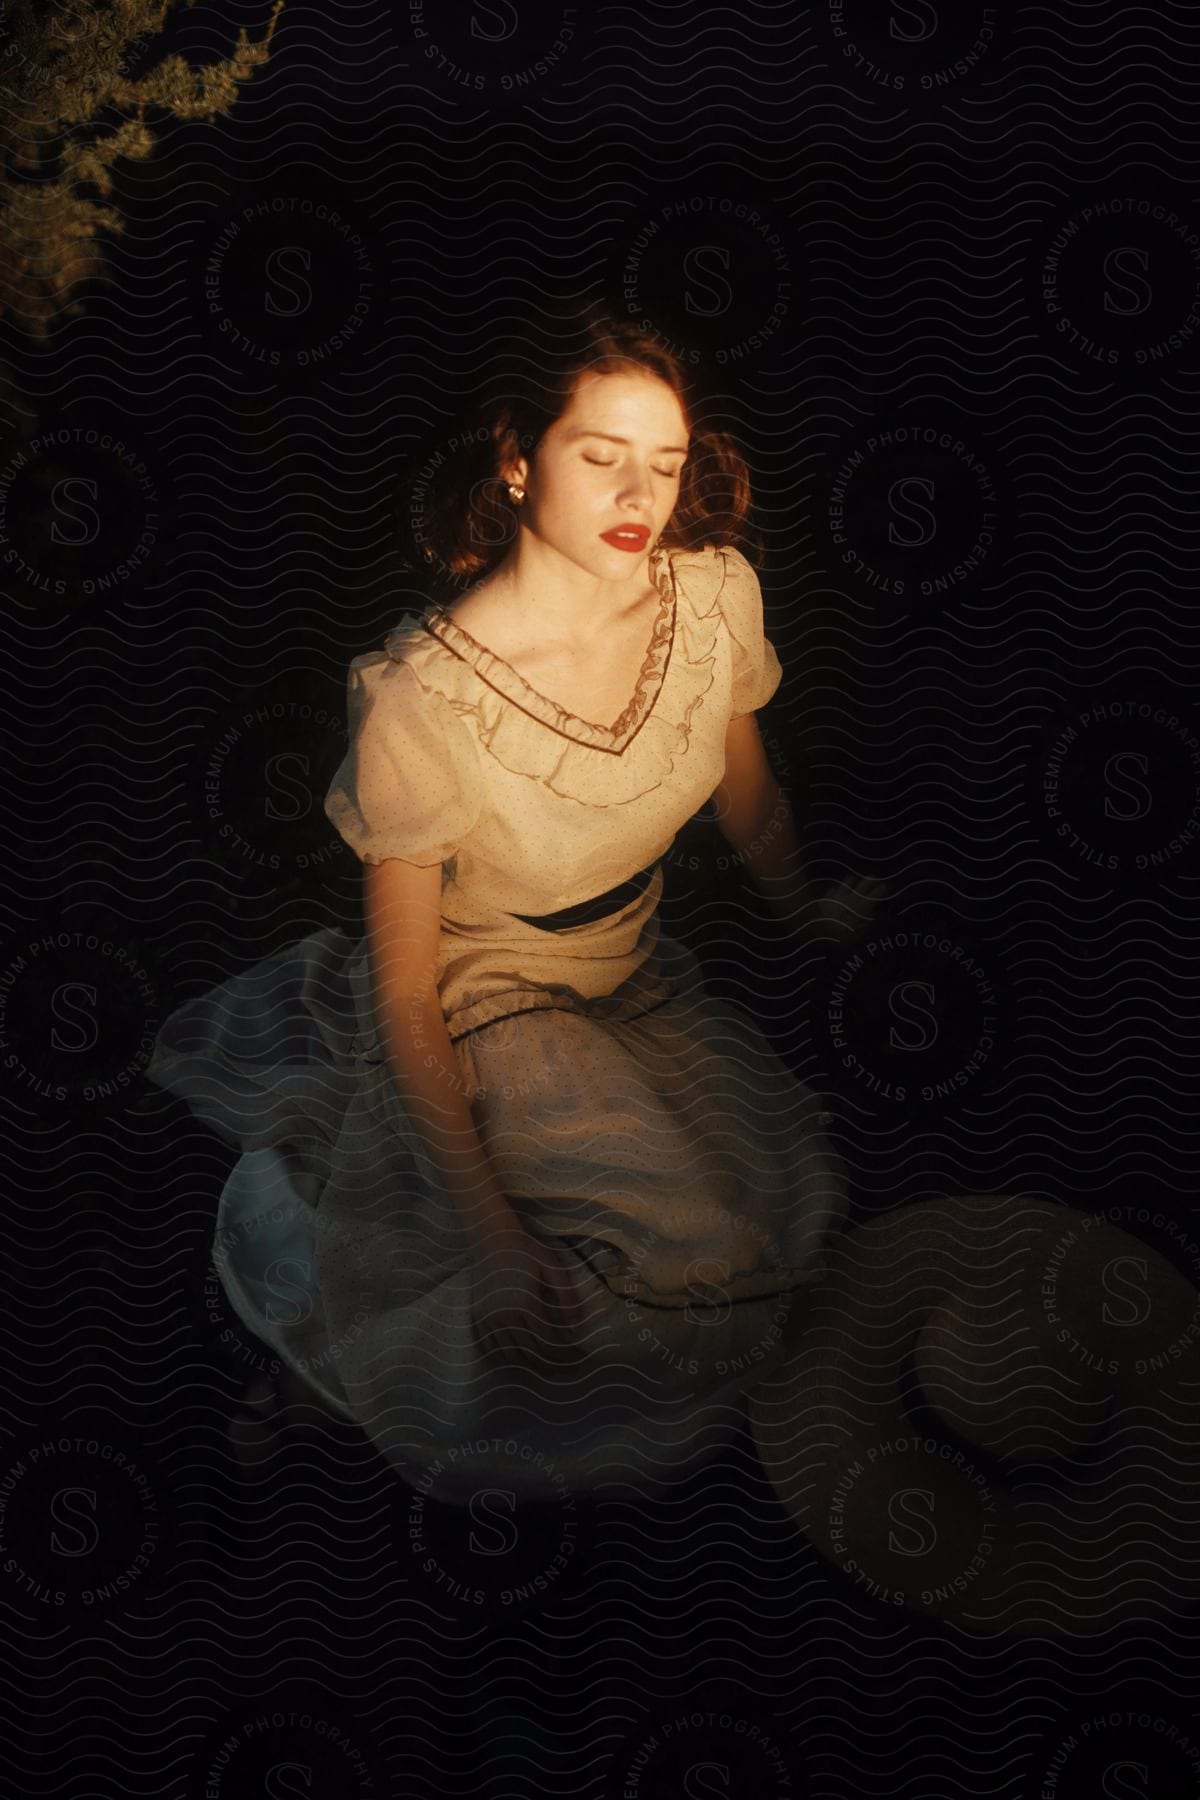 A young woman sits and models a white dress outdoors at night.